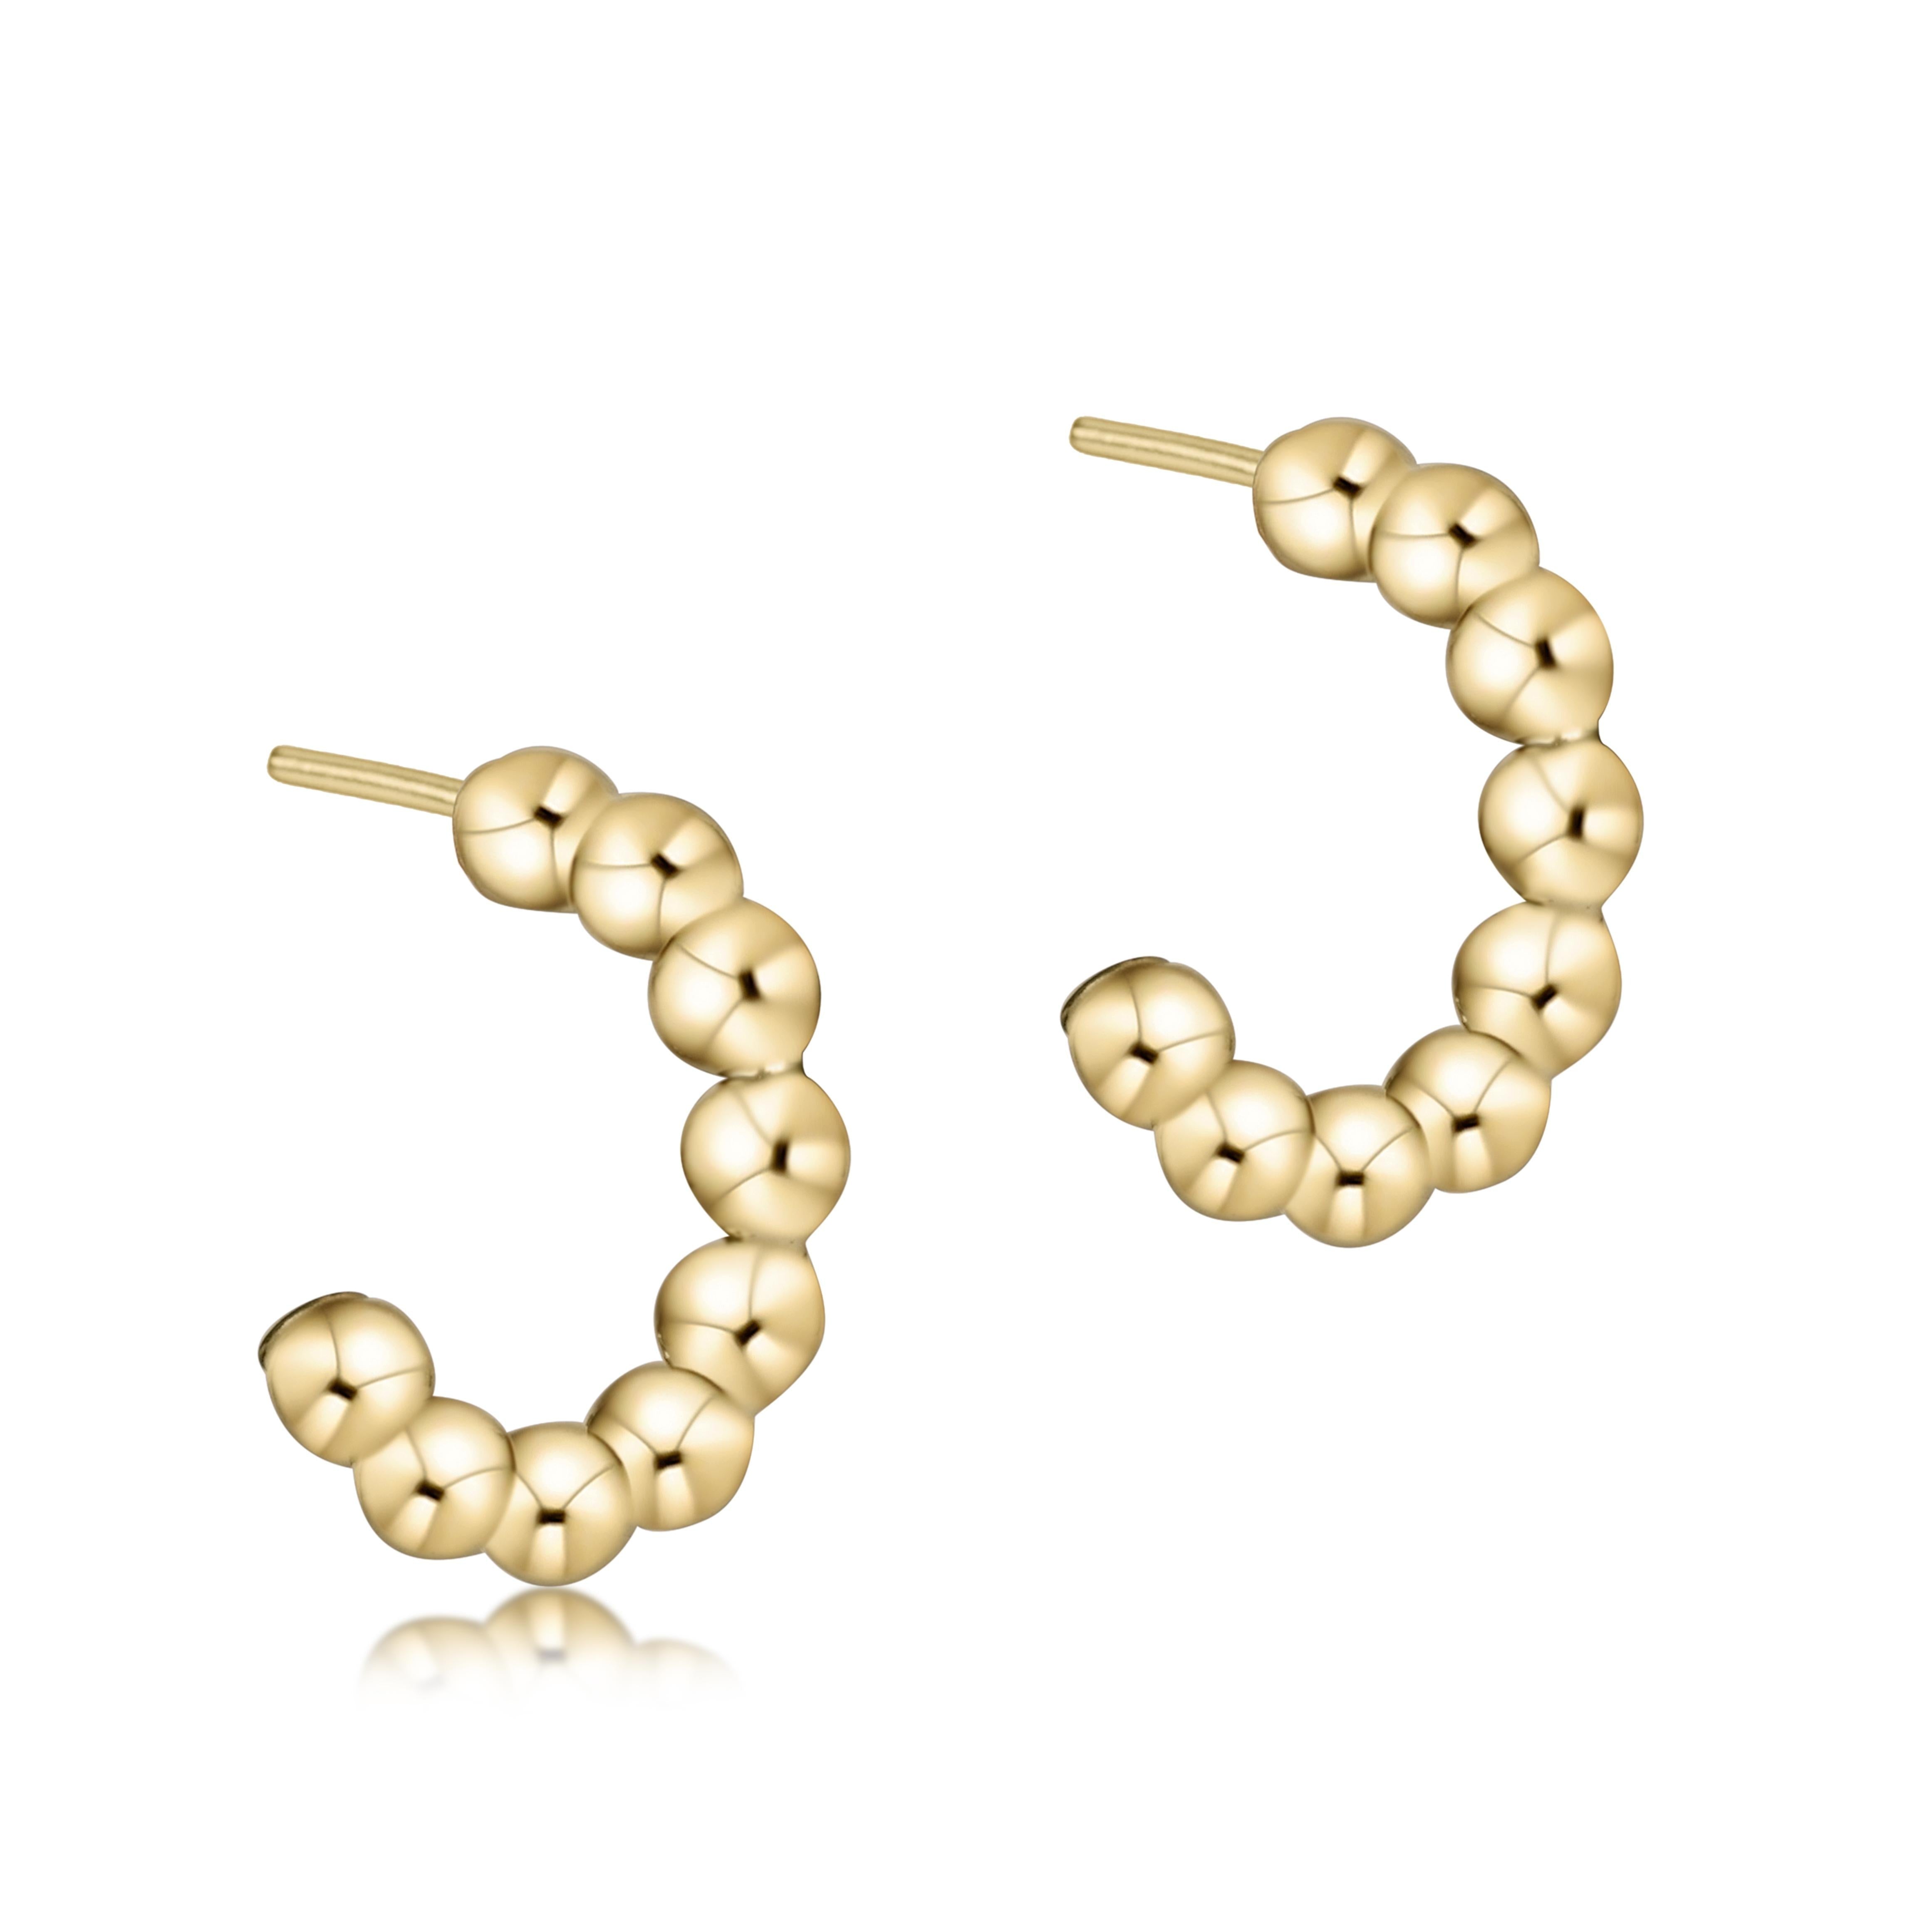 Buy 4MM Ball 18K Gold Piercing Ear Stud | Ideal for every day wear at  Amazon.in